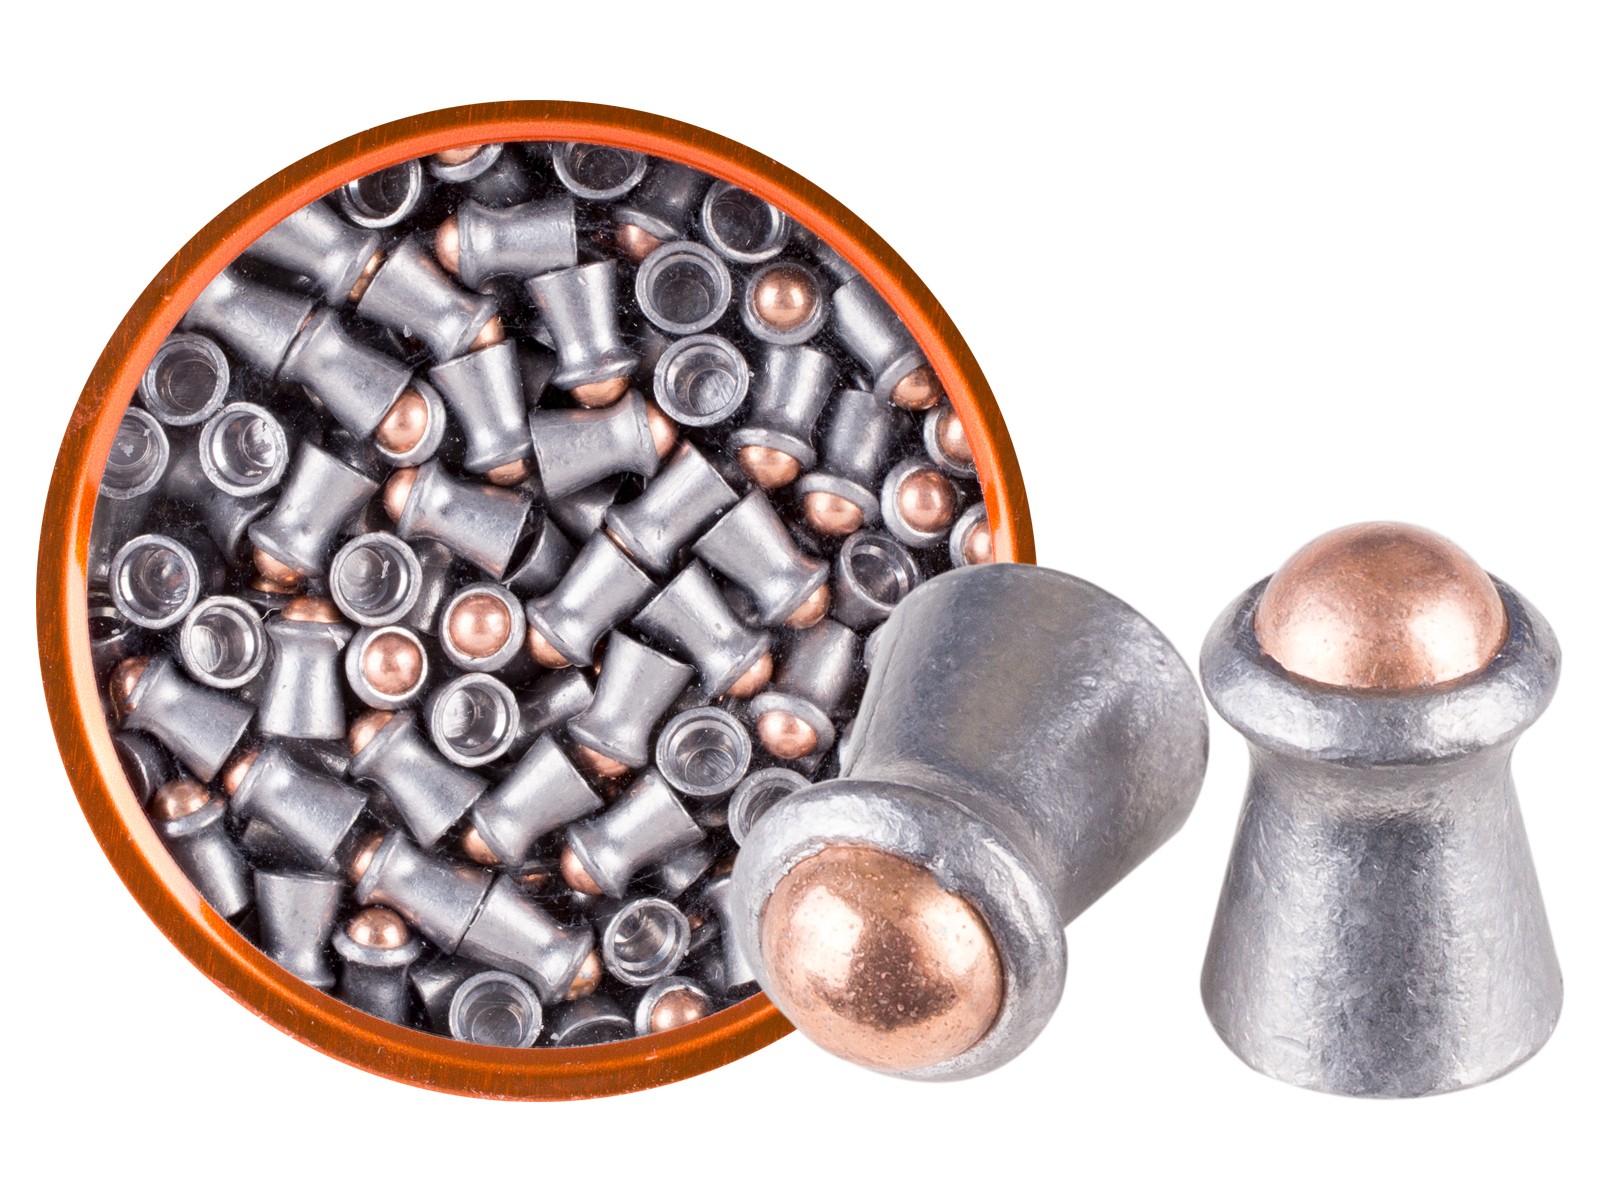 632092854 Gamo Combo Pack Performance .177 Cal Hunting Pellets for sale online 